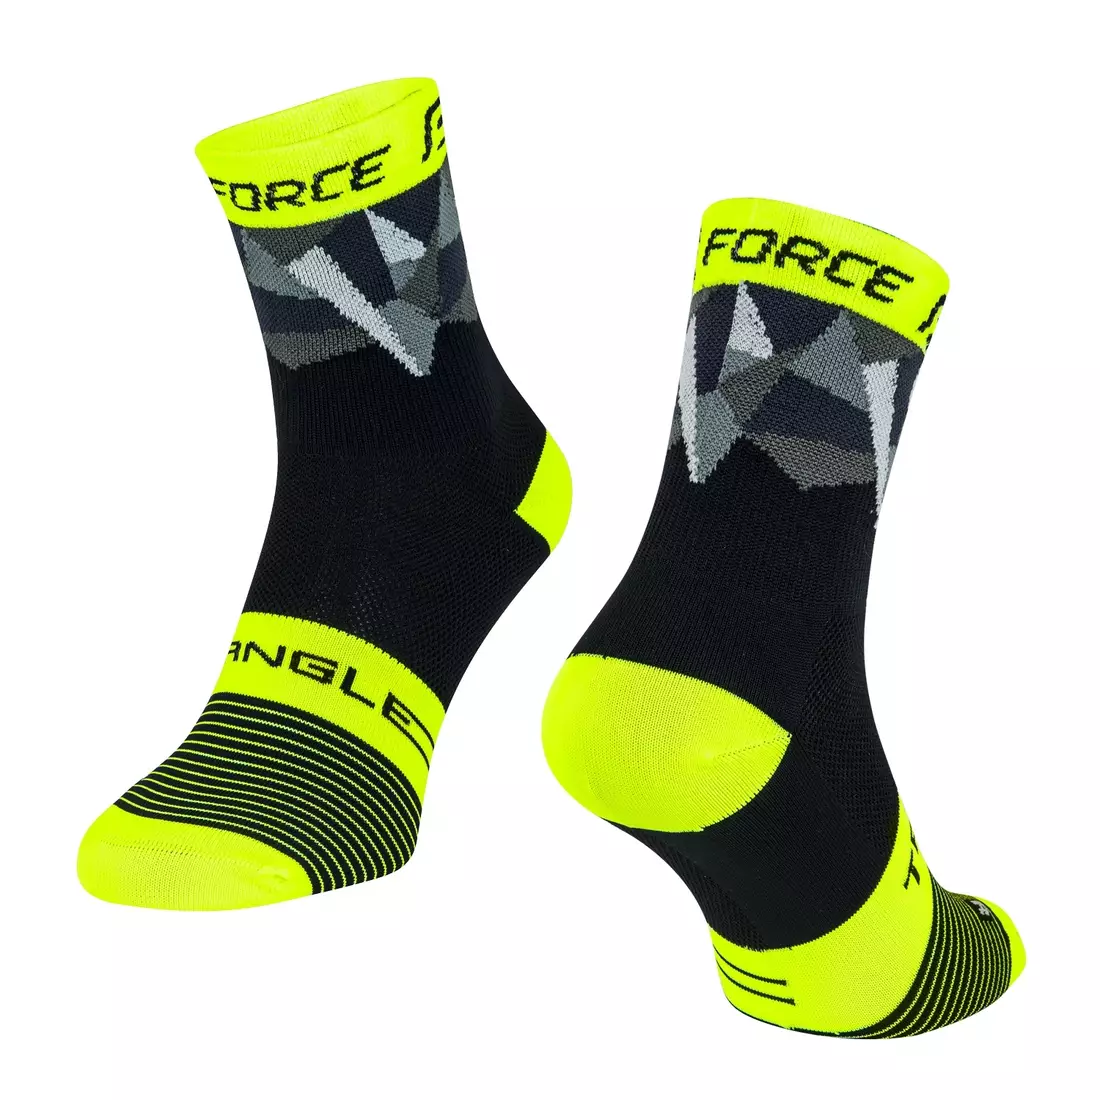 FORCE TRIANGLE cycling/sports socks, black-fluo